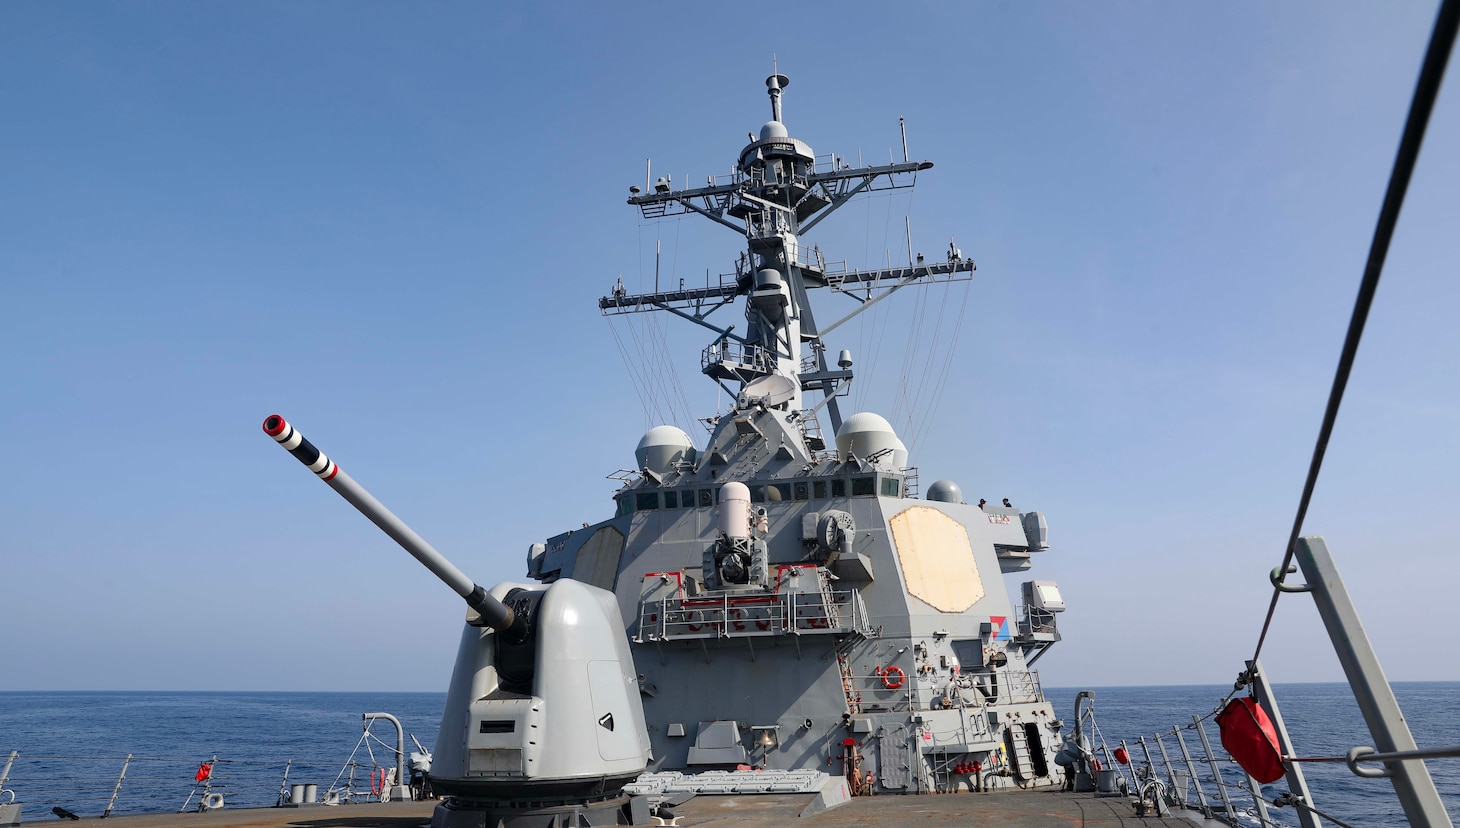 TAIWAN STRAIT (April 16, 2023) – The Arleigh Burke-class guided-missile destroyer USS Milius (DDG 69) conducts a Taiwan Strait transit. Milius is assigned to Commander, Task Force 71/Destroyer Squadron (DESRON) 15, the Navy’s largest forward-deployed DESRON and the U.S. 7th Fleet’s principal surface force. (U.S. Navy photo by Mass Communication Specialist 1st Class Greg Johnson)